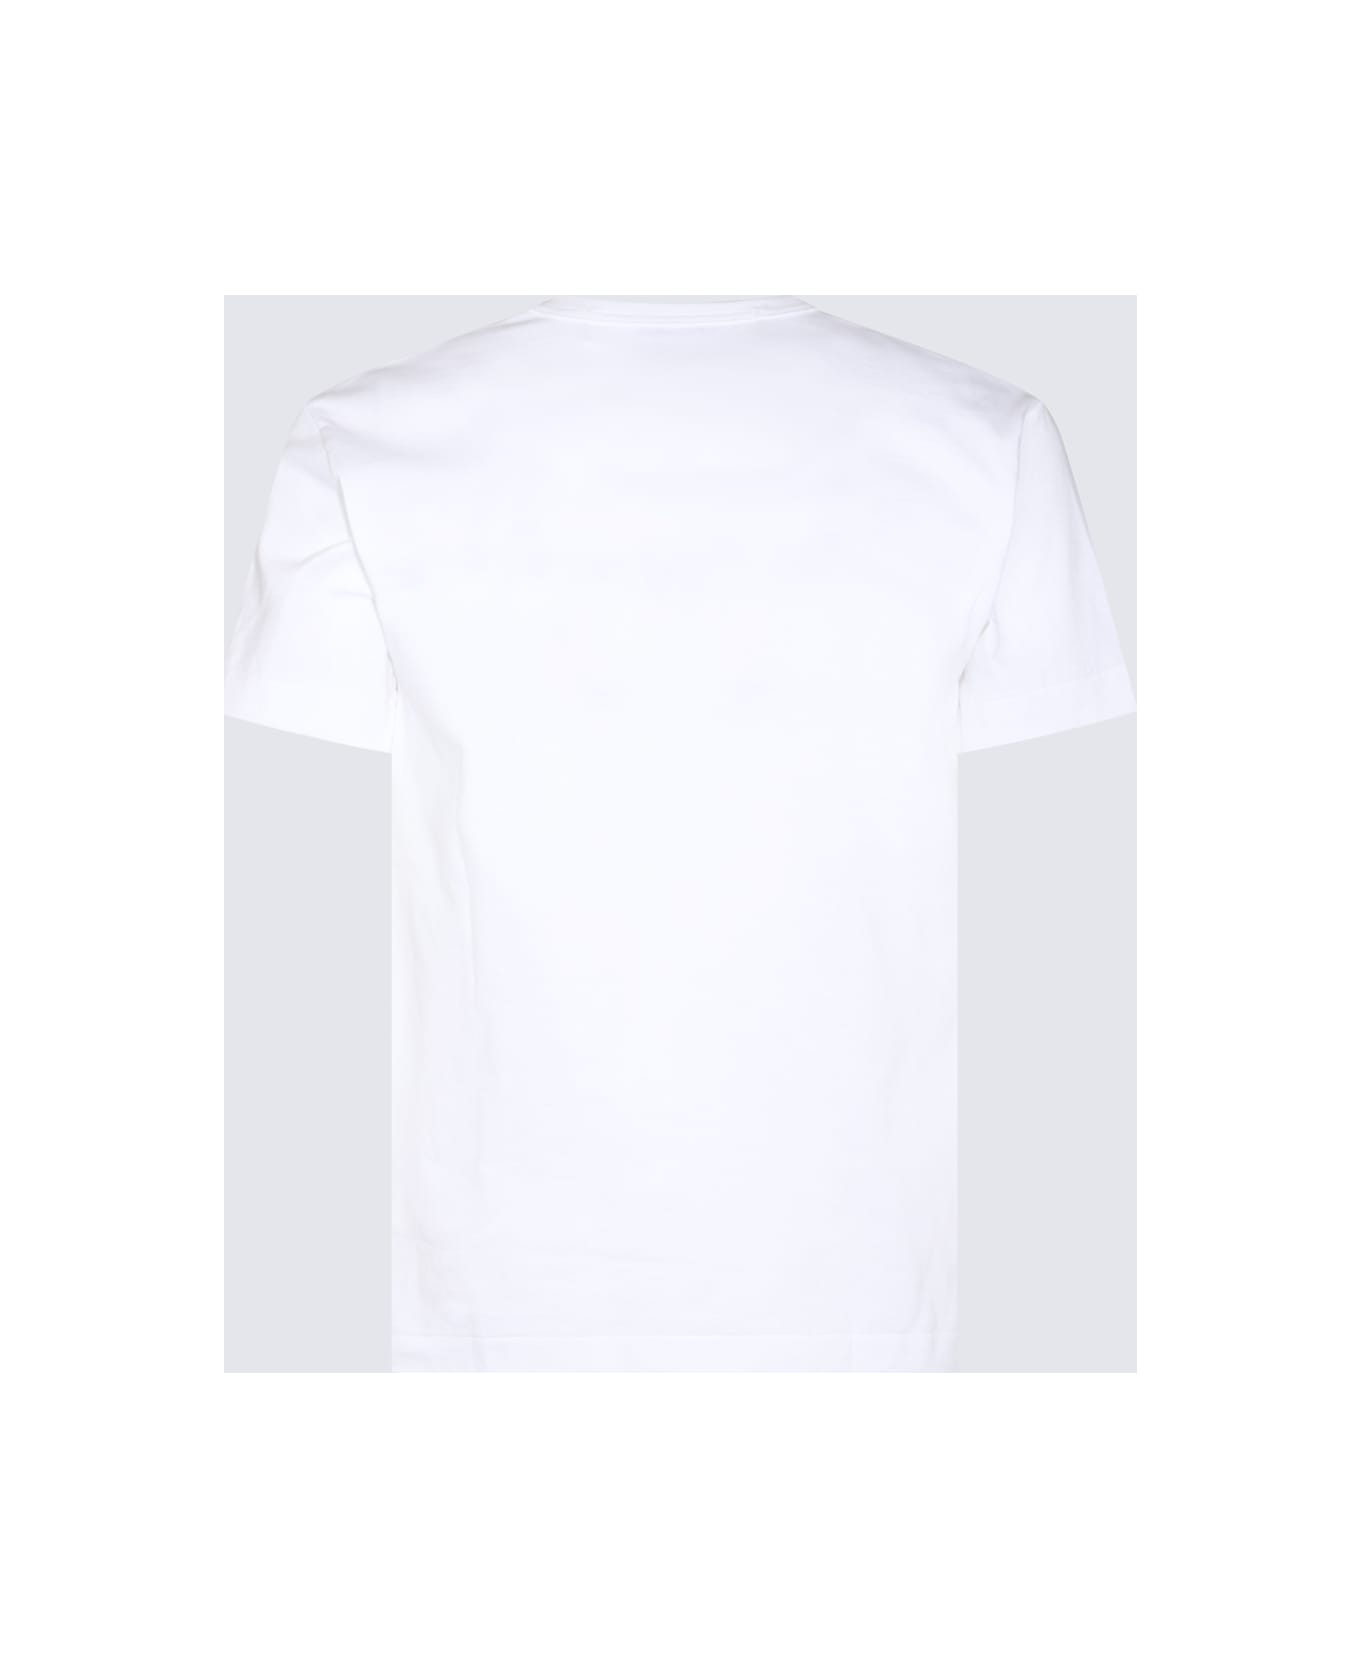 Comme des Garçons Play White And Red Cotton Play T-shirt - White